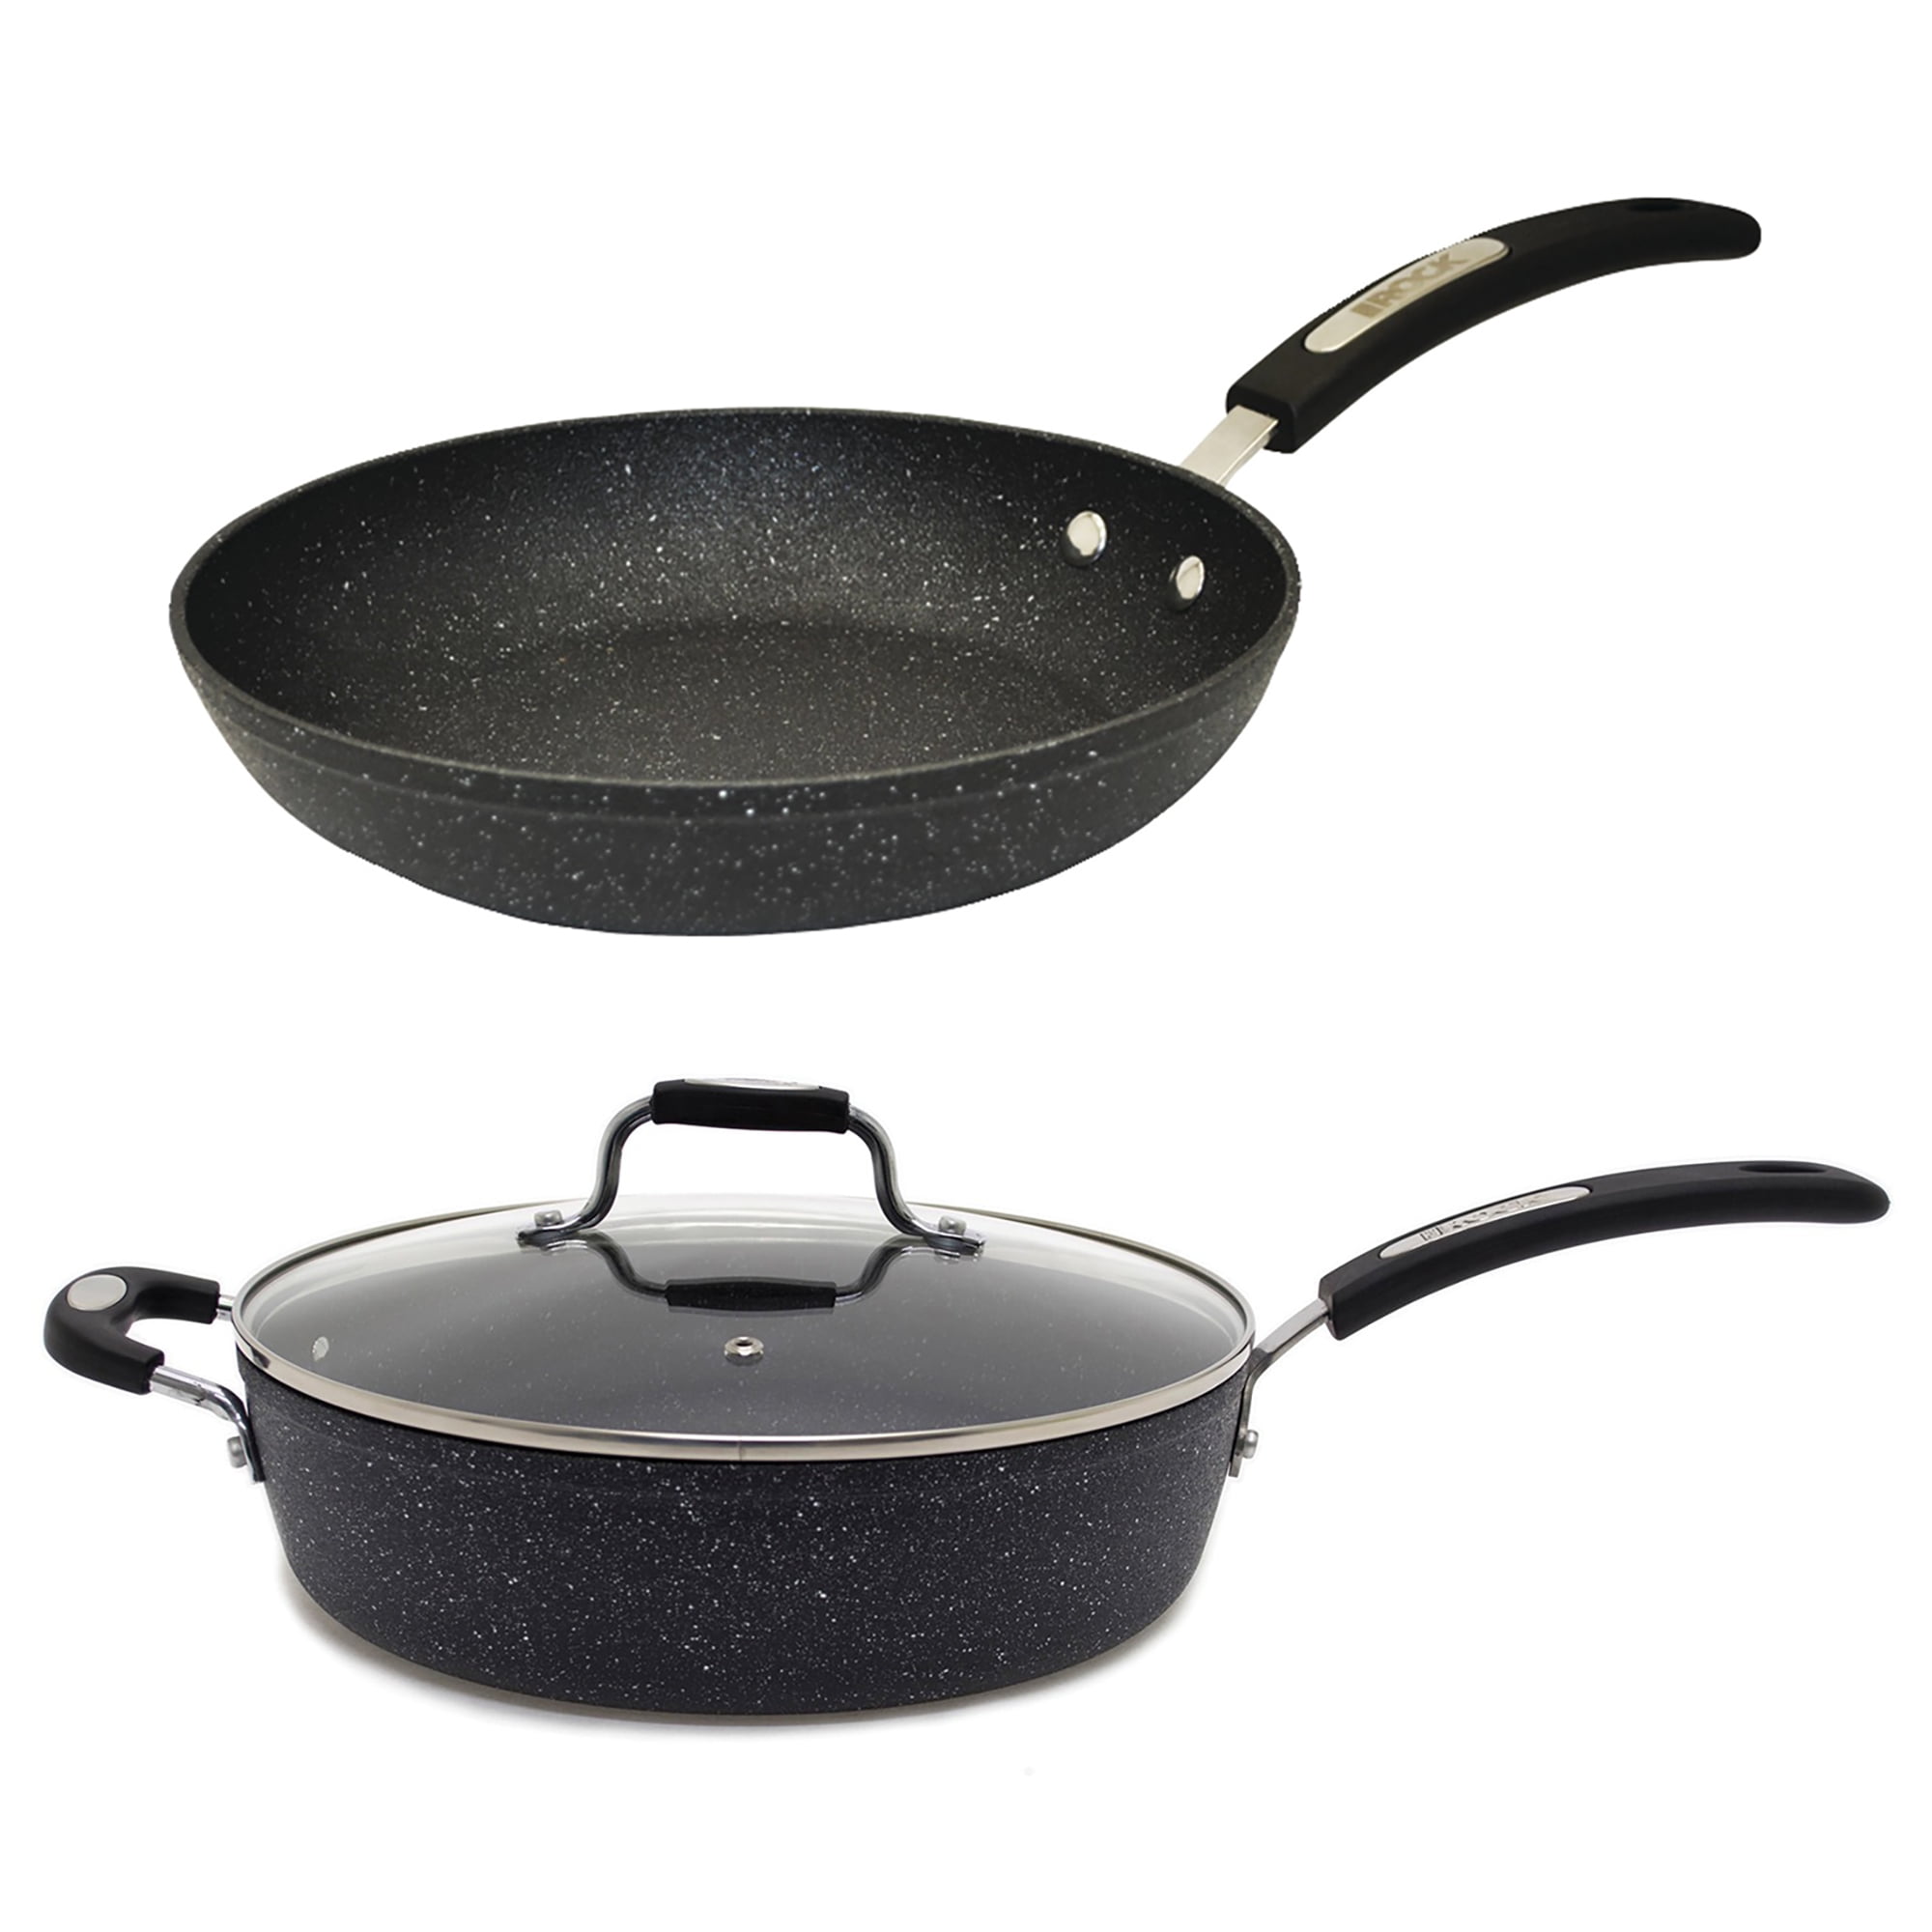 The Rock by Starfrit 11 Deep-Fry Pan with Lid and Bakelite Handles and 9.5 Fry Pan with Bakelite Handle